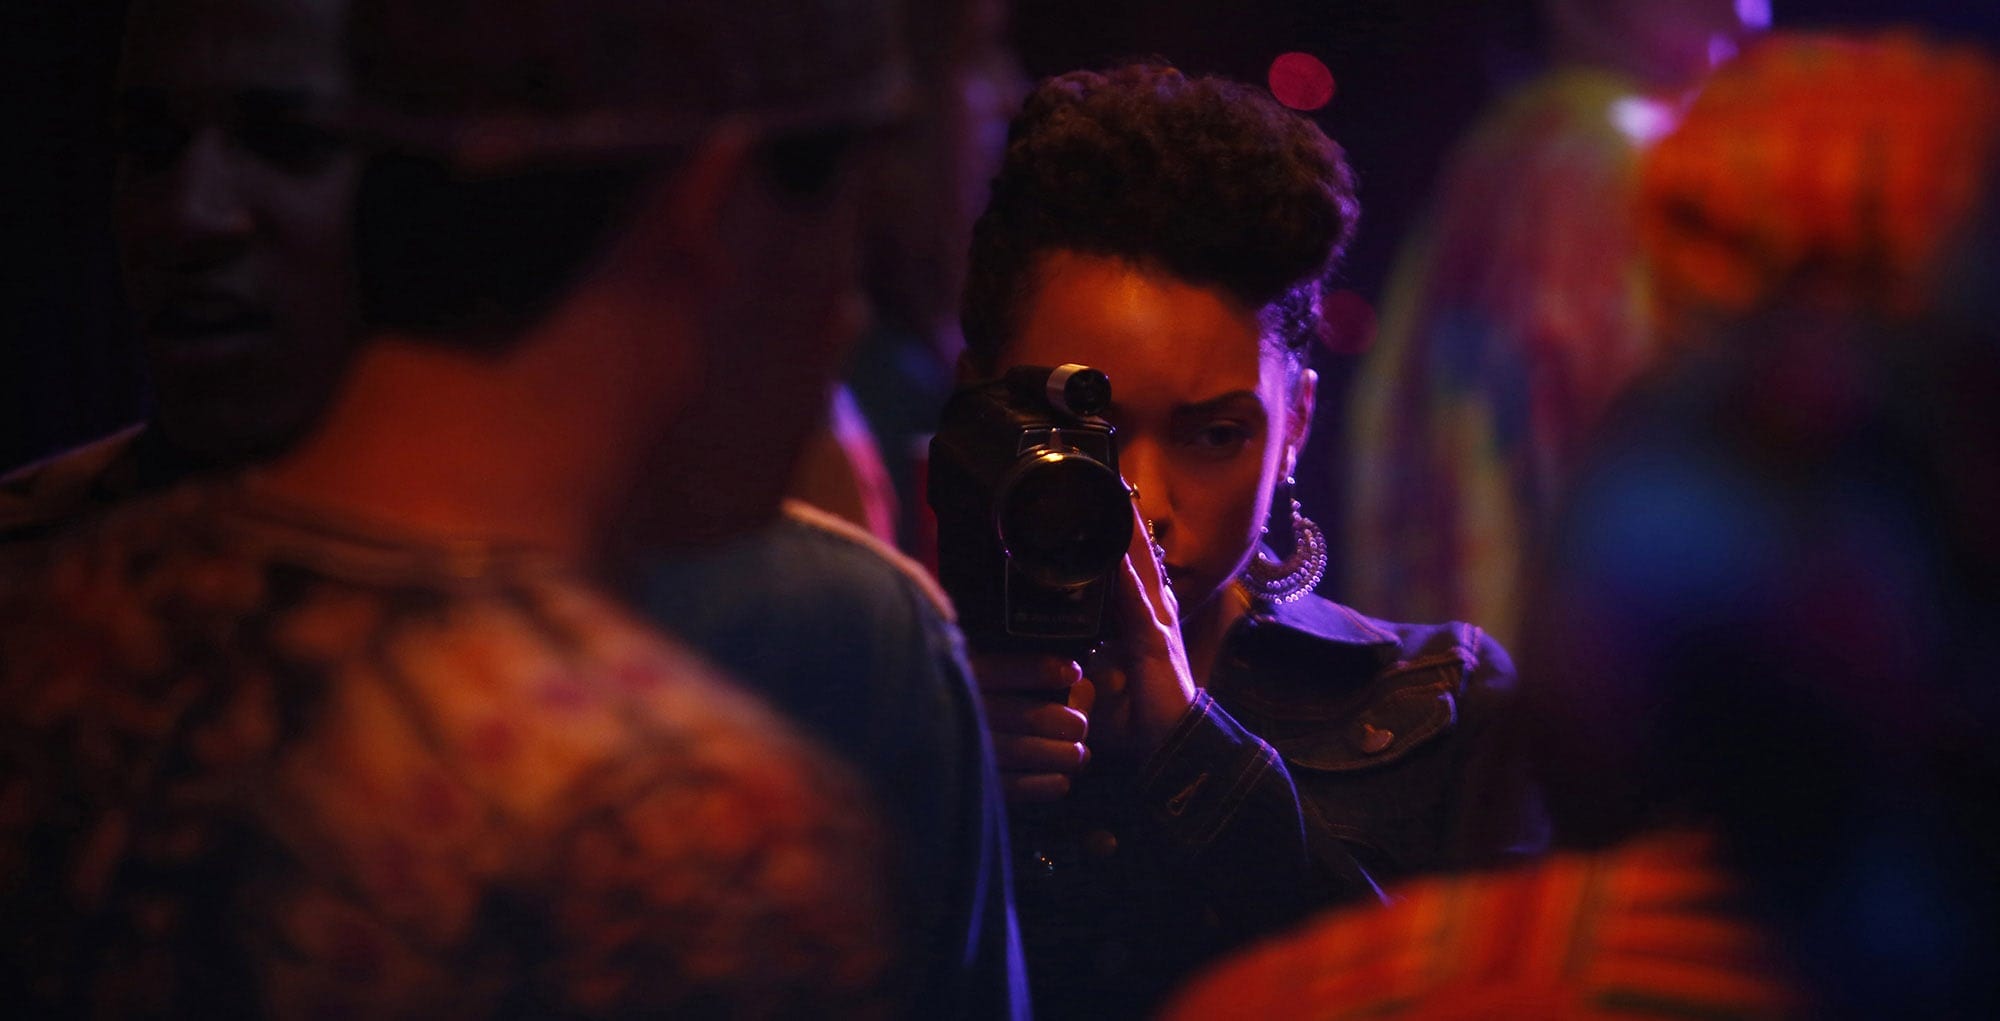 'Dear White People' is back with its second season, y’all! And it’s good. To celebrate the return of one of television’s most controversial and culturally relevant shows, let’s discuss five things the show got right this season.